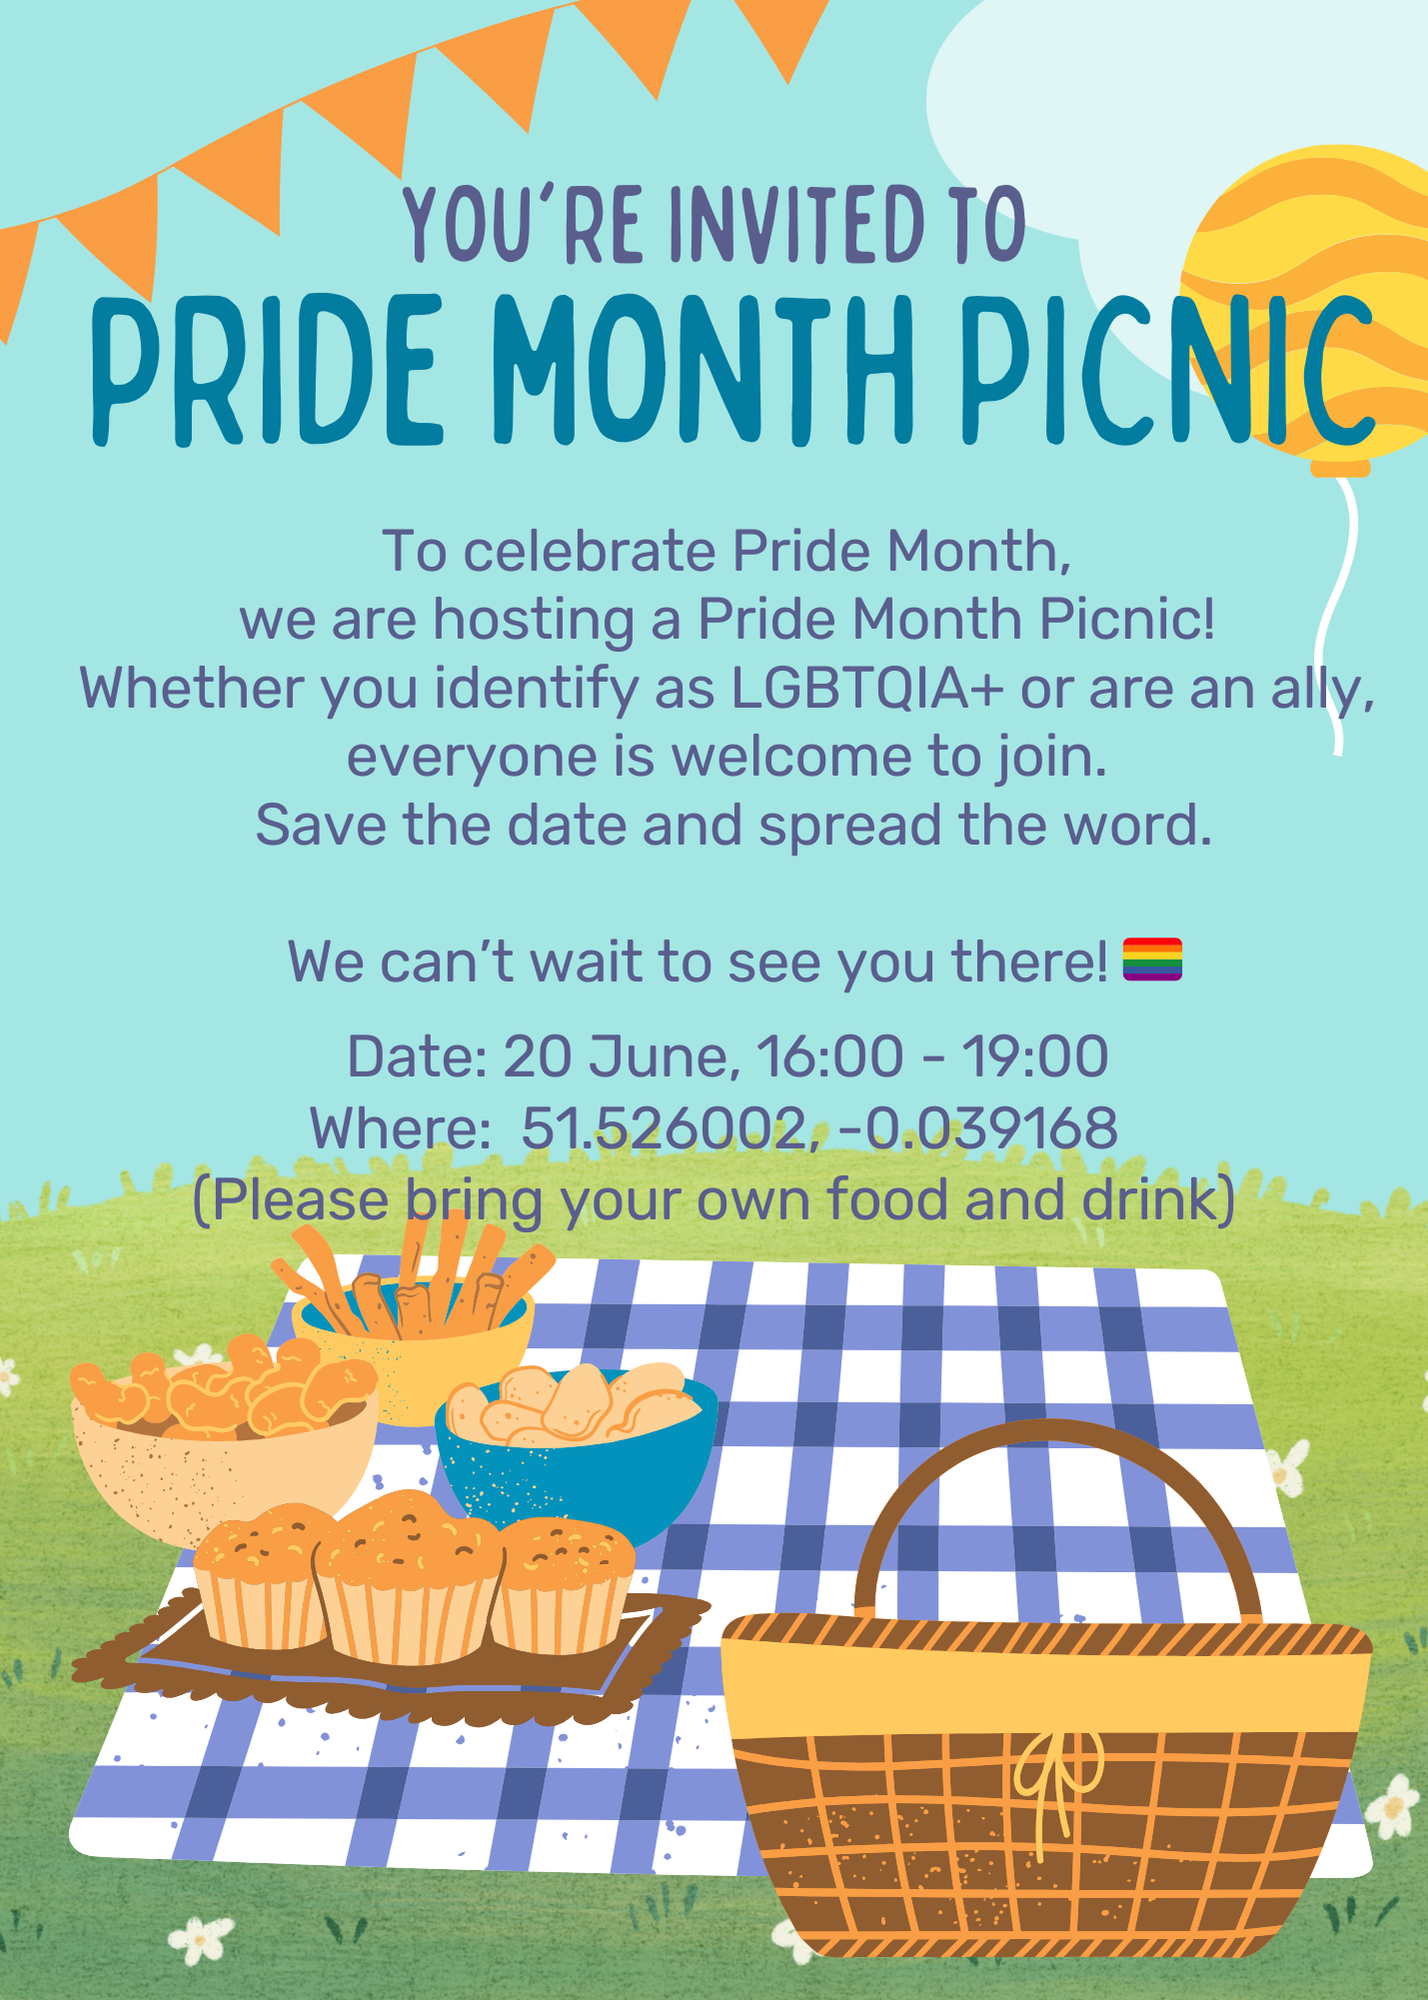 An illustration of a picnic blanket on the grass with sun in the sky. Text overlaid reads 'Pride Month Picnic'